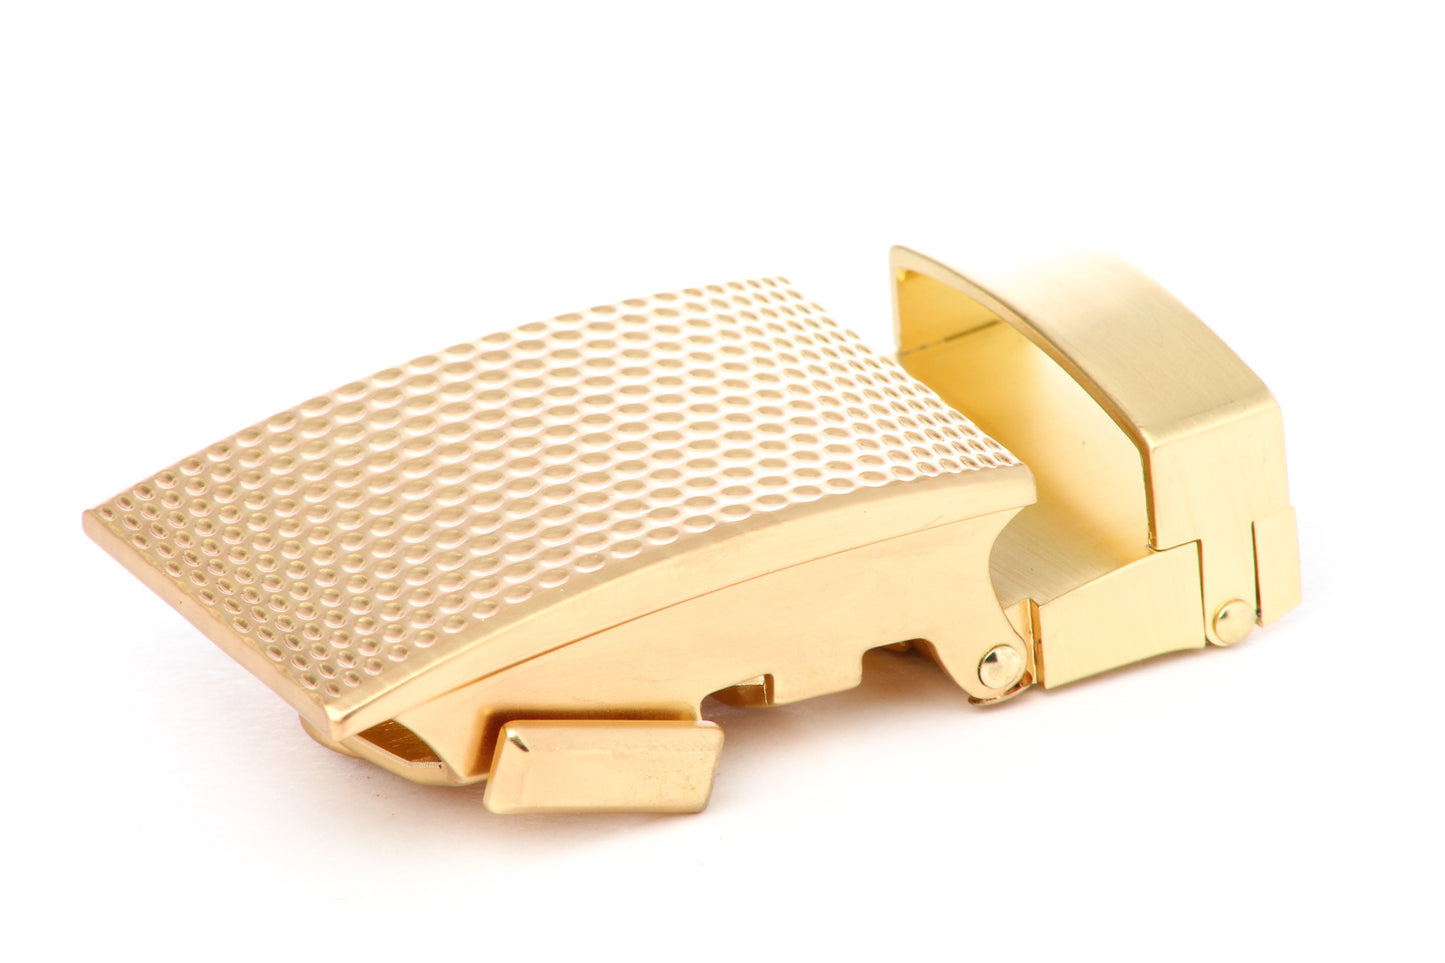 Men's golf ratchet belt buckle in gold with a 1.25-inch width.